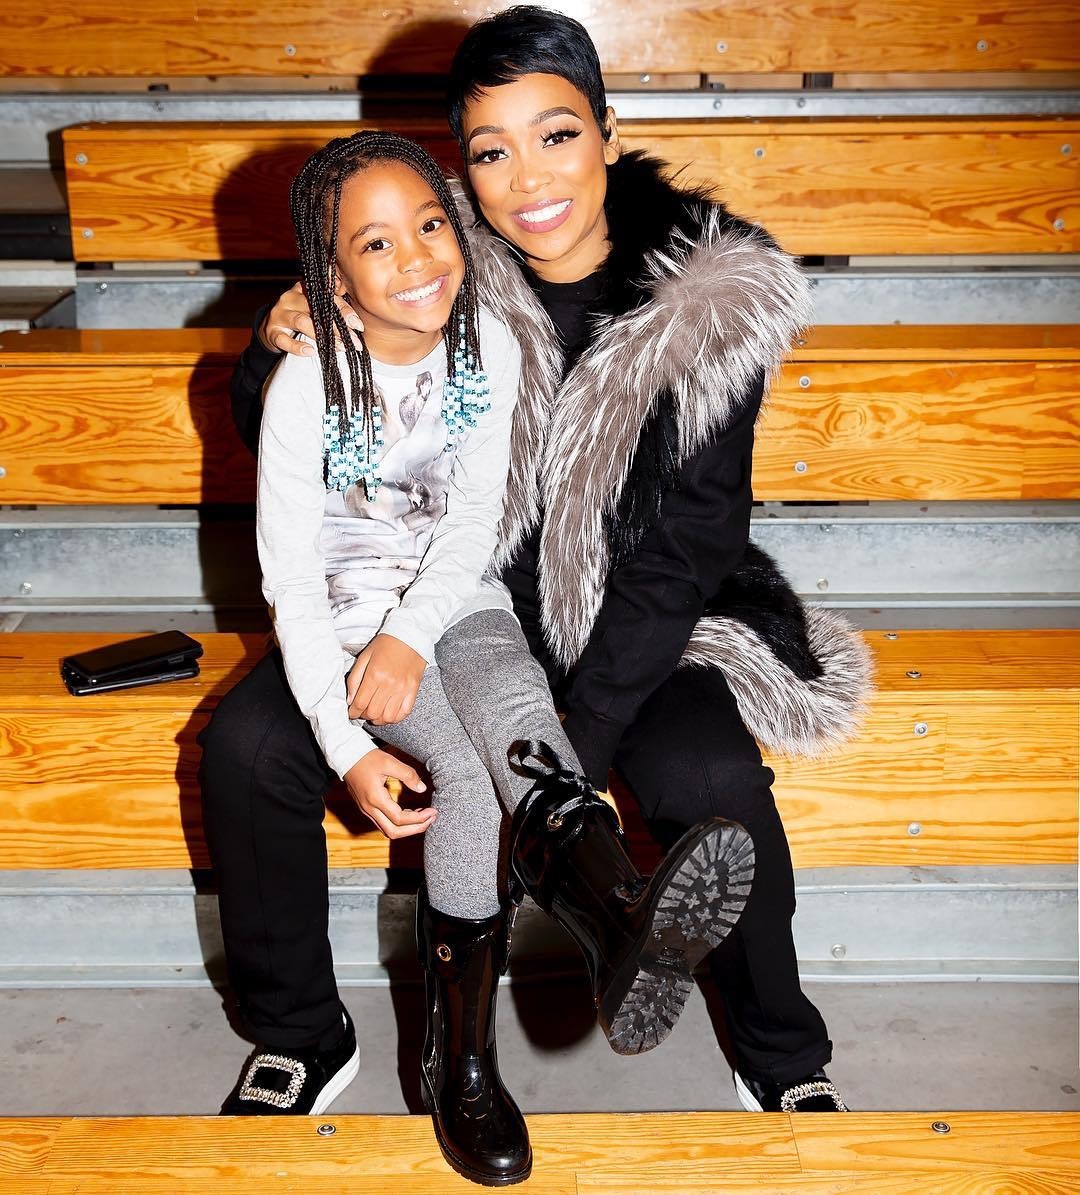 MONICA BROWN AND T.I. SUPPORT THEIR KIDS AT A SCHOOL EVENT